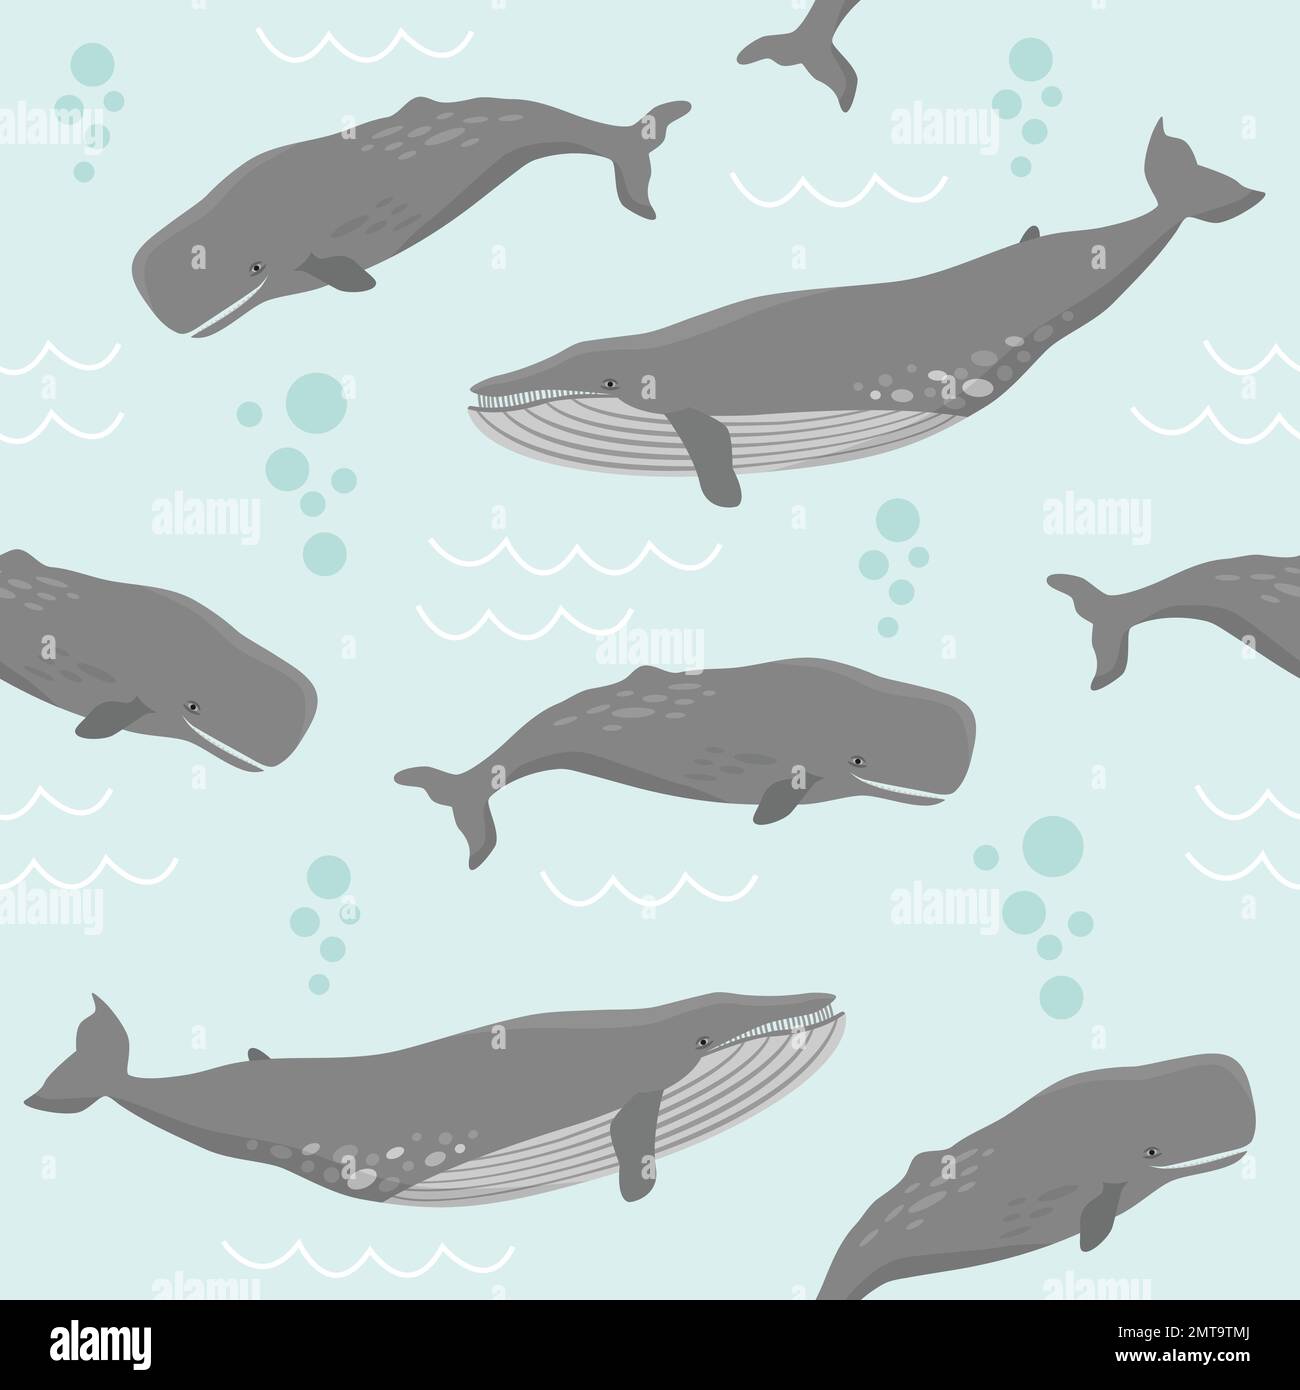 Seamless pattern with whales. Blue whales and Sperm whales swimming under water. Stock Vector